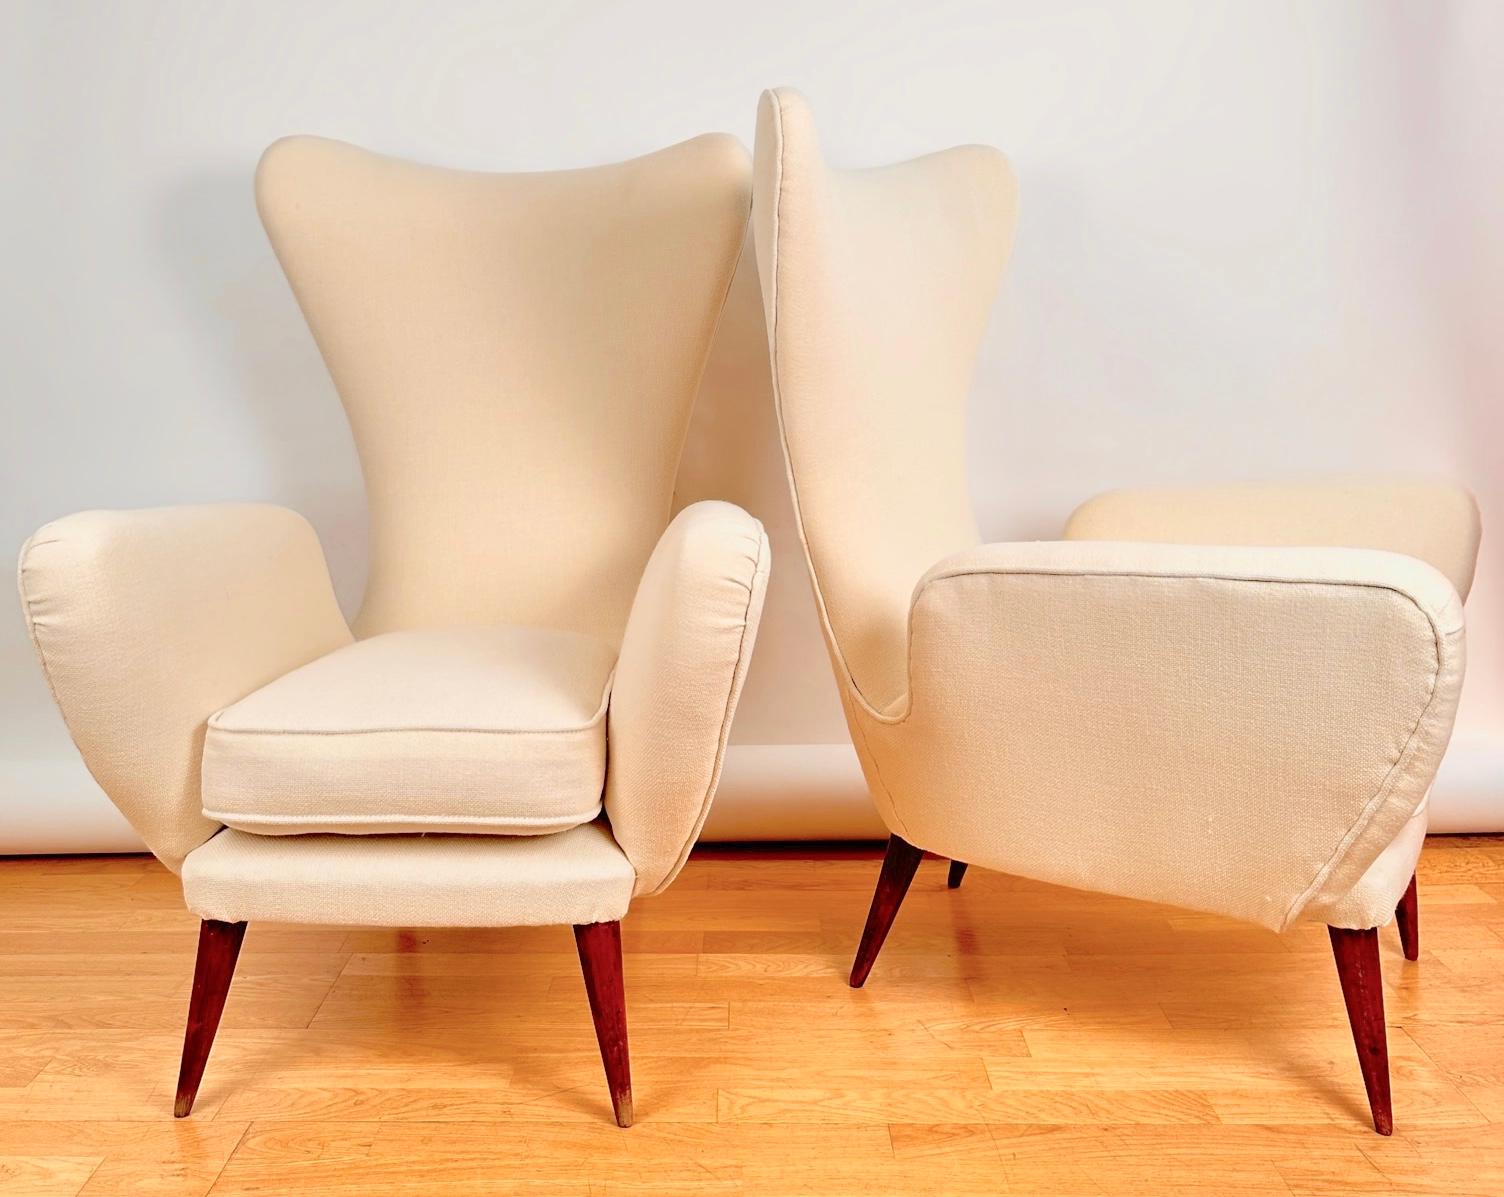 A pair of high back Italian 1960 armchairs designed by Emilia Sala and Giorgio Madini.Newly upholstered in Kvadrat wool.
Beautiful and extremely confortable.